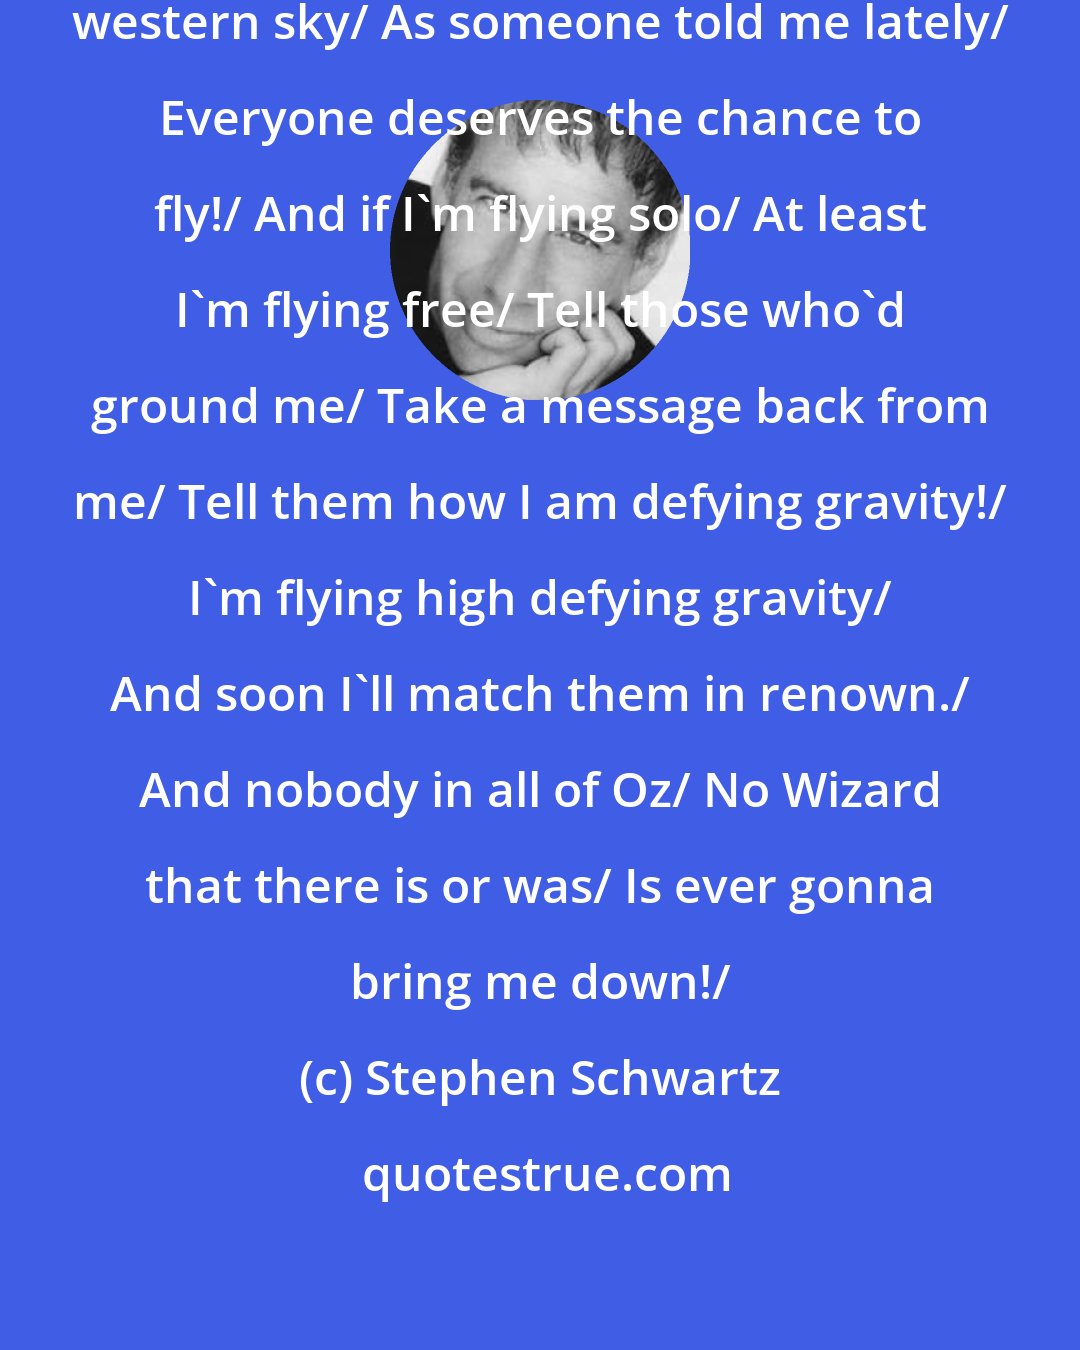 Stephen Schwartz: So if you care to find me/ Look to the western sky/ As someone told me lately/ Everyone deserves the chance to fly!/ And if I'm flying solo/ At least I'm flying free/ Tell those who'd ground me/ Take a message back from me/ Tell them how I am defying gravity!/ I'm flying high defying gravity/ And soon I'll match them in renown./ And nobody in all of Oz/ No Wizard that there is or was/ Is ever gonna bring me down!/